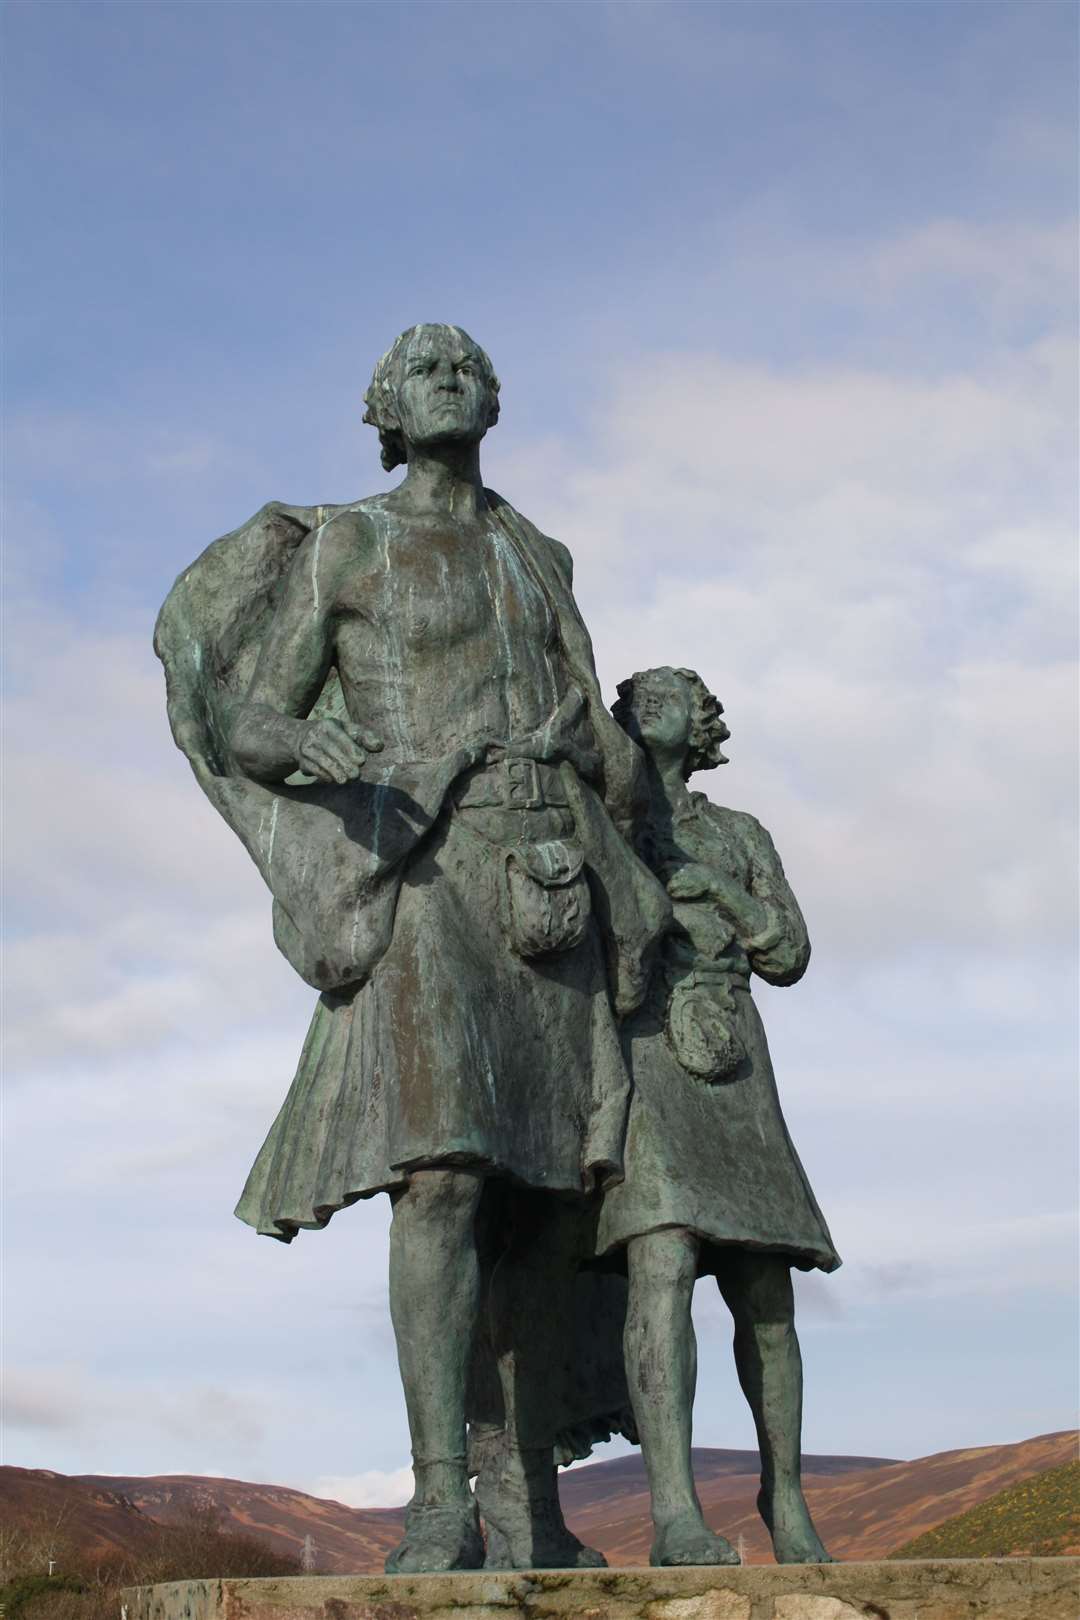 The Emigrants statue at Helmsdale is a reminder of historic challenges.